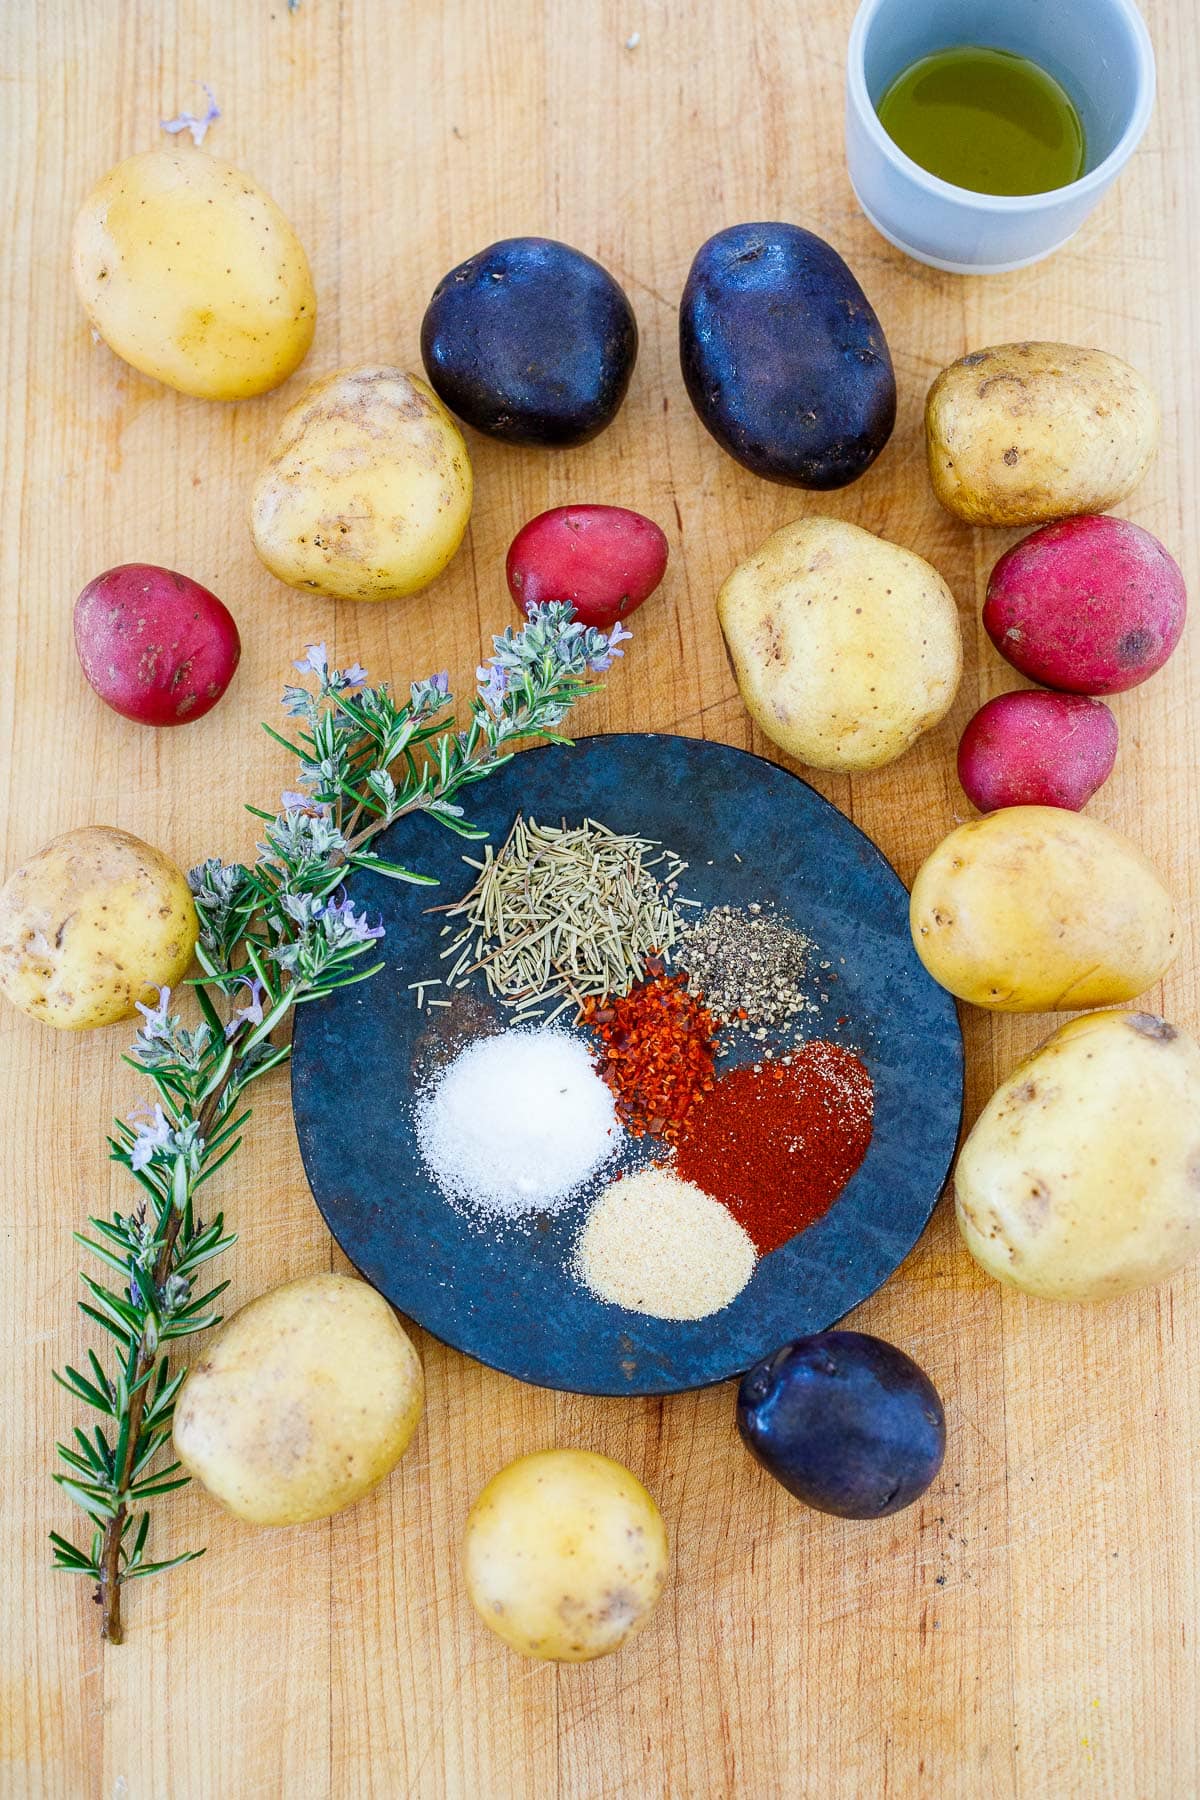 ingredients for breakfast potatoes- medley of baby potatoes, fresh rosemary, dish with assorted spices and salt.